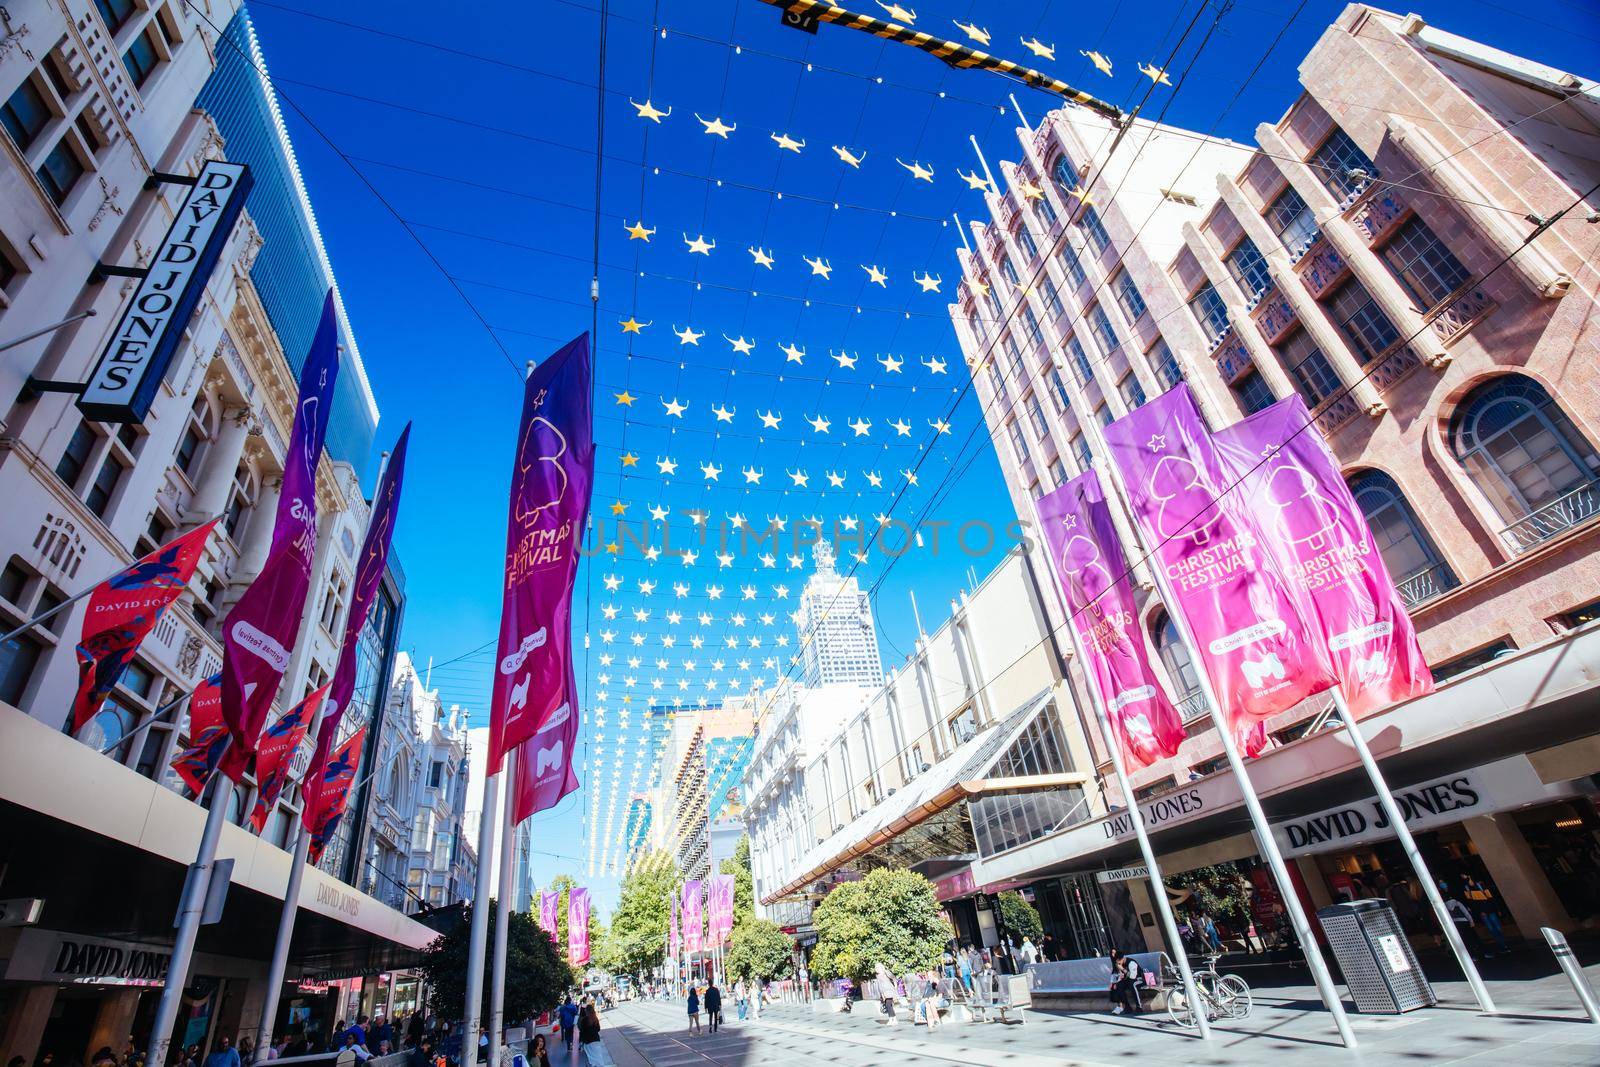 Melbourne, Australia - December 18, 2020: Busy Bourke St Mall with Christmas decorations and festivities in Melbourne, Victoria, Australia